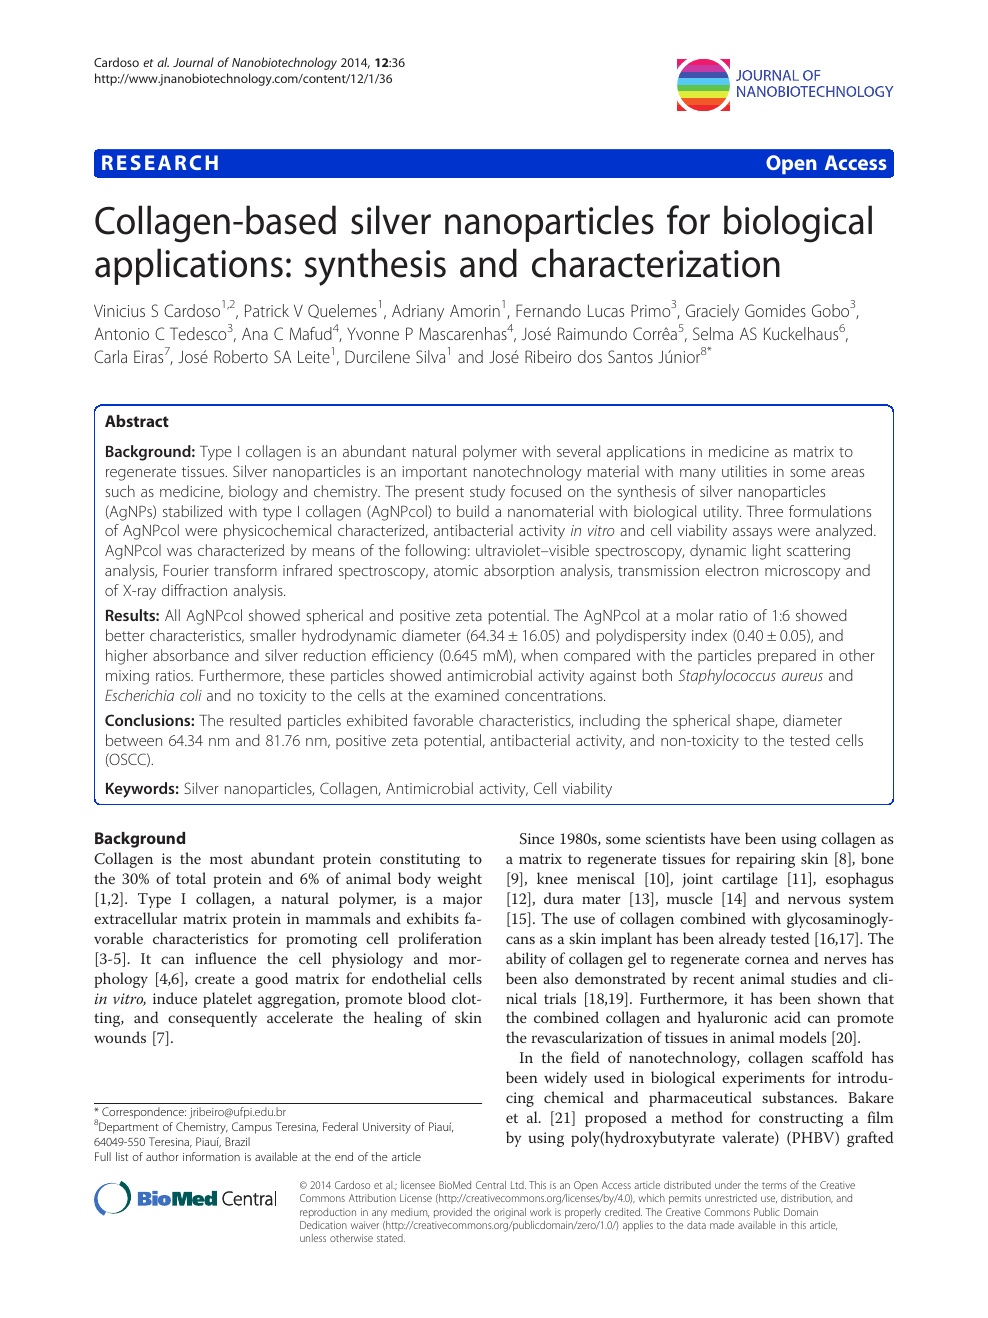 Collagen Based Silver Nanoparticles For Biological Applications Synthesis And Characterization Topic Of Research Paper In Nano Technology Download Scholarly Article Pdf And Read For Free On Cyberleninka Open Science Hub